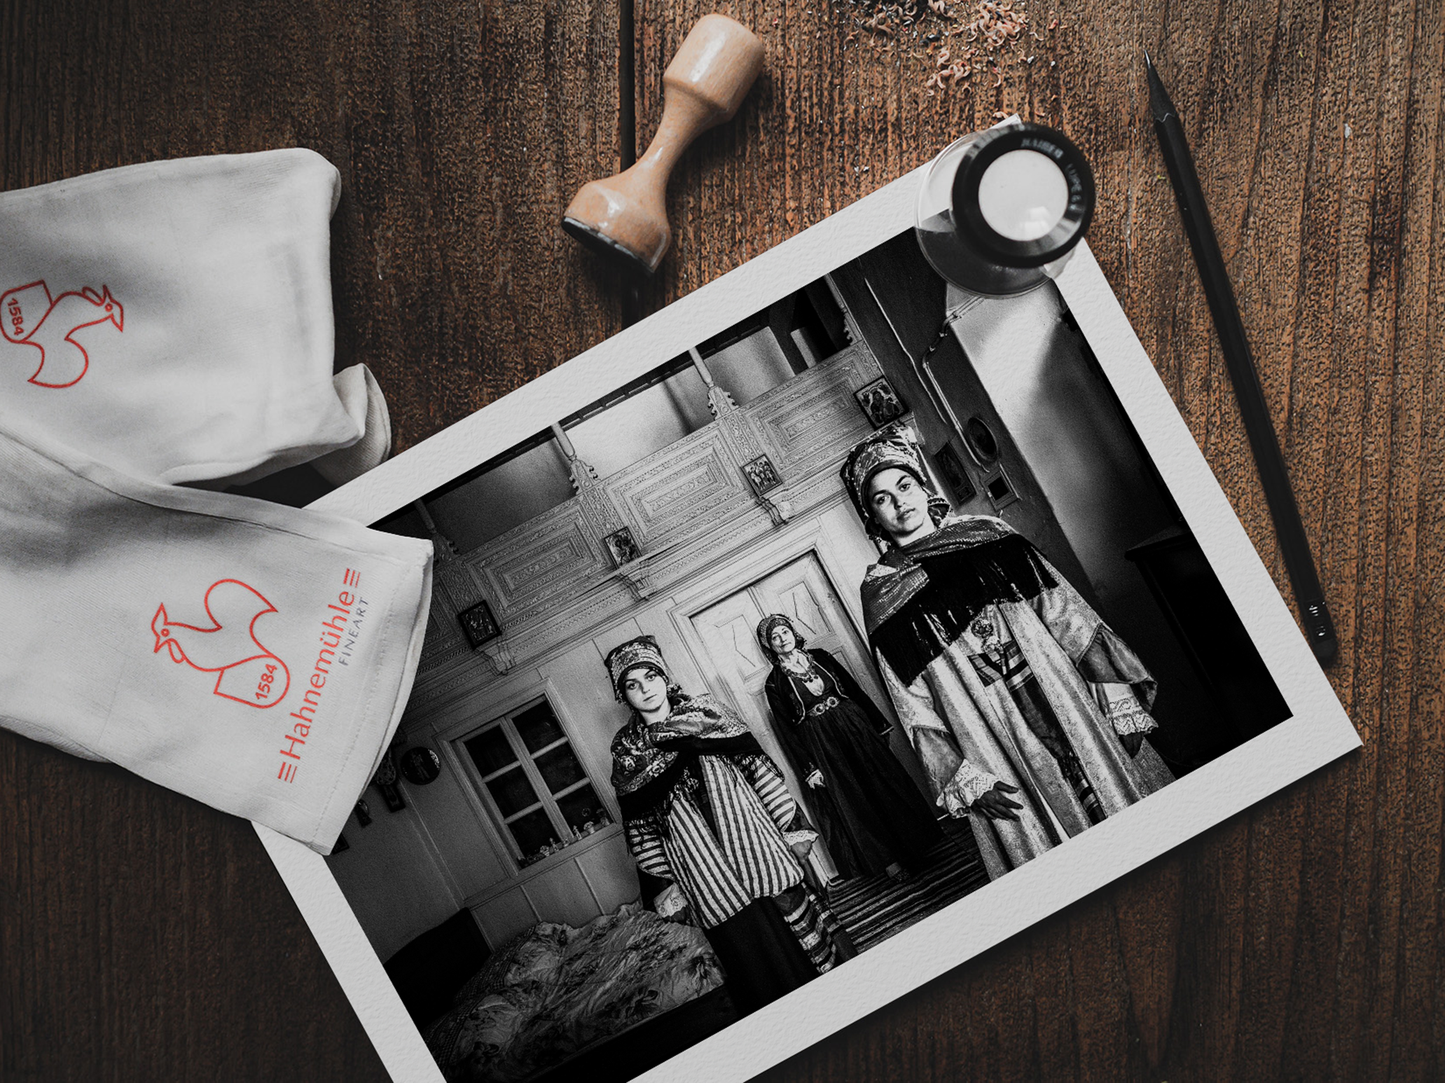 Black and White Photography Wall Art Greece | Three ladies in the traditional costumes of Symi island inside a house Dodecanese Greece by George Tatakis - photo print on table